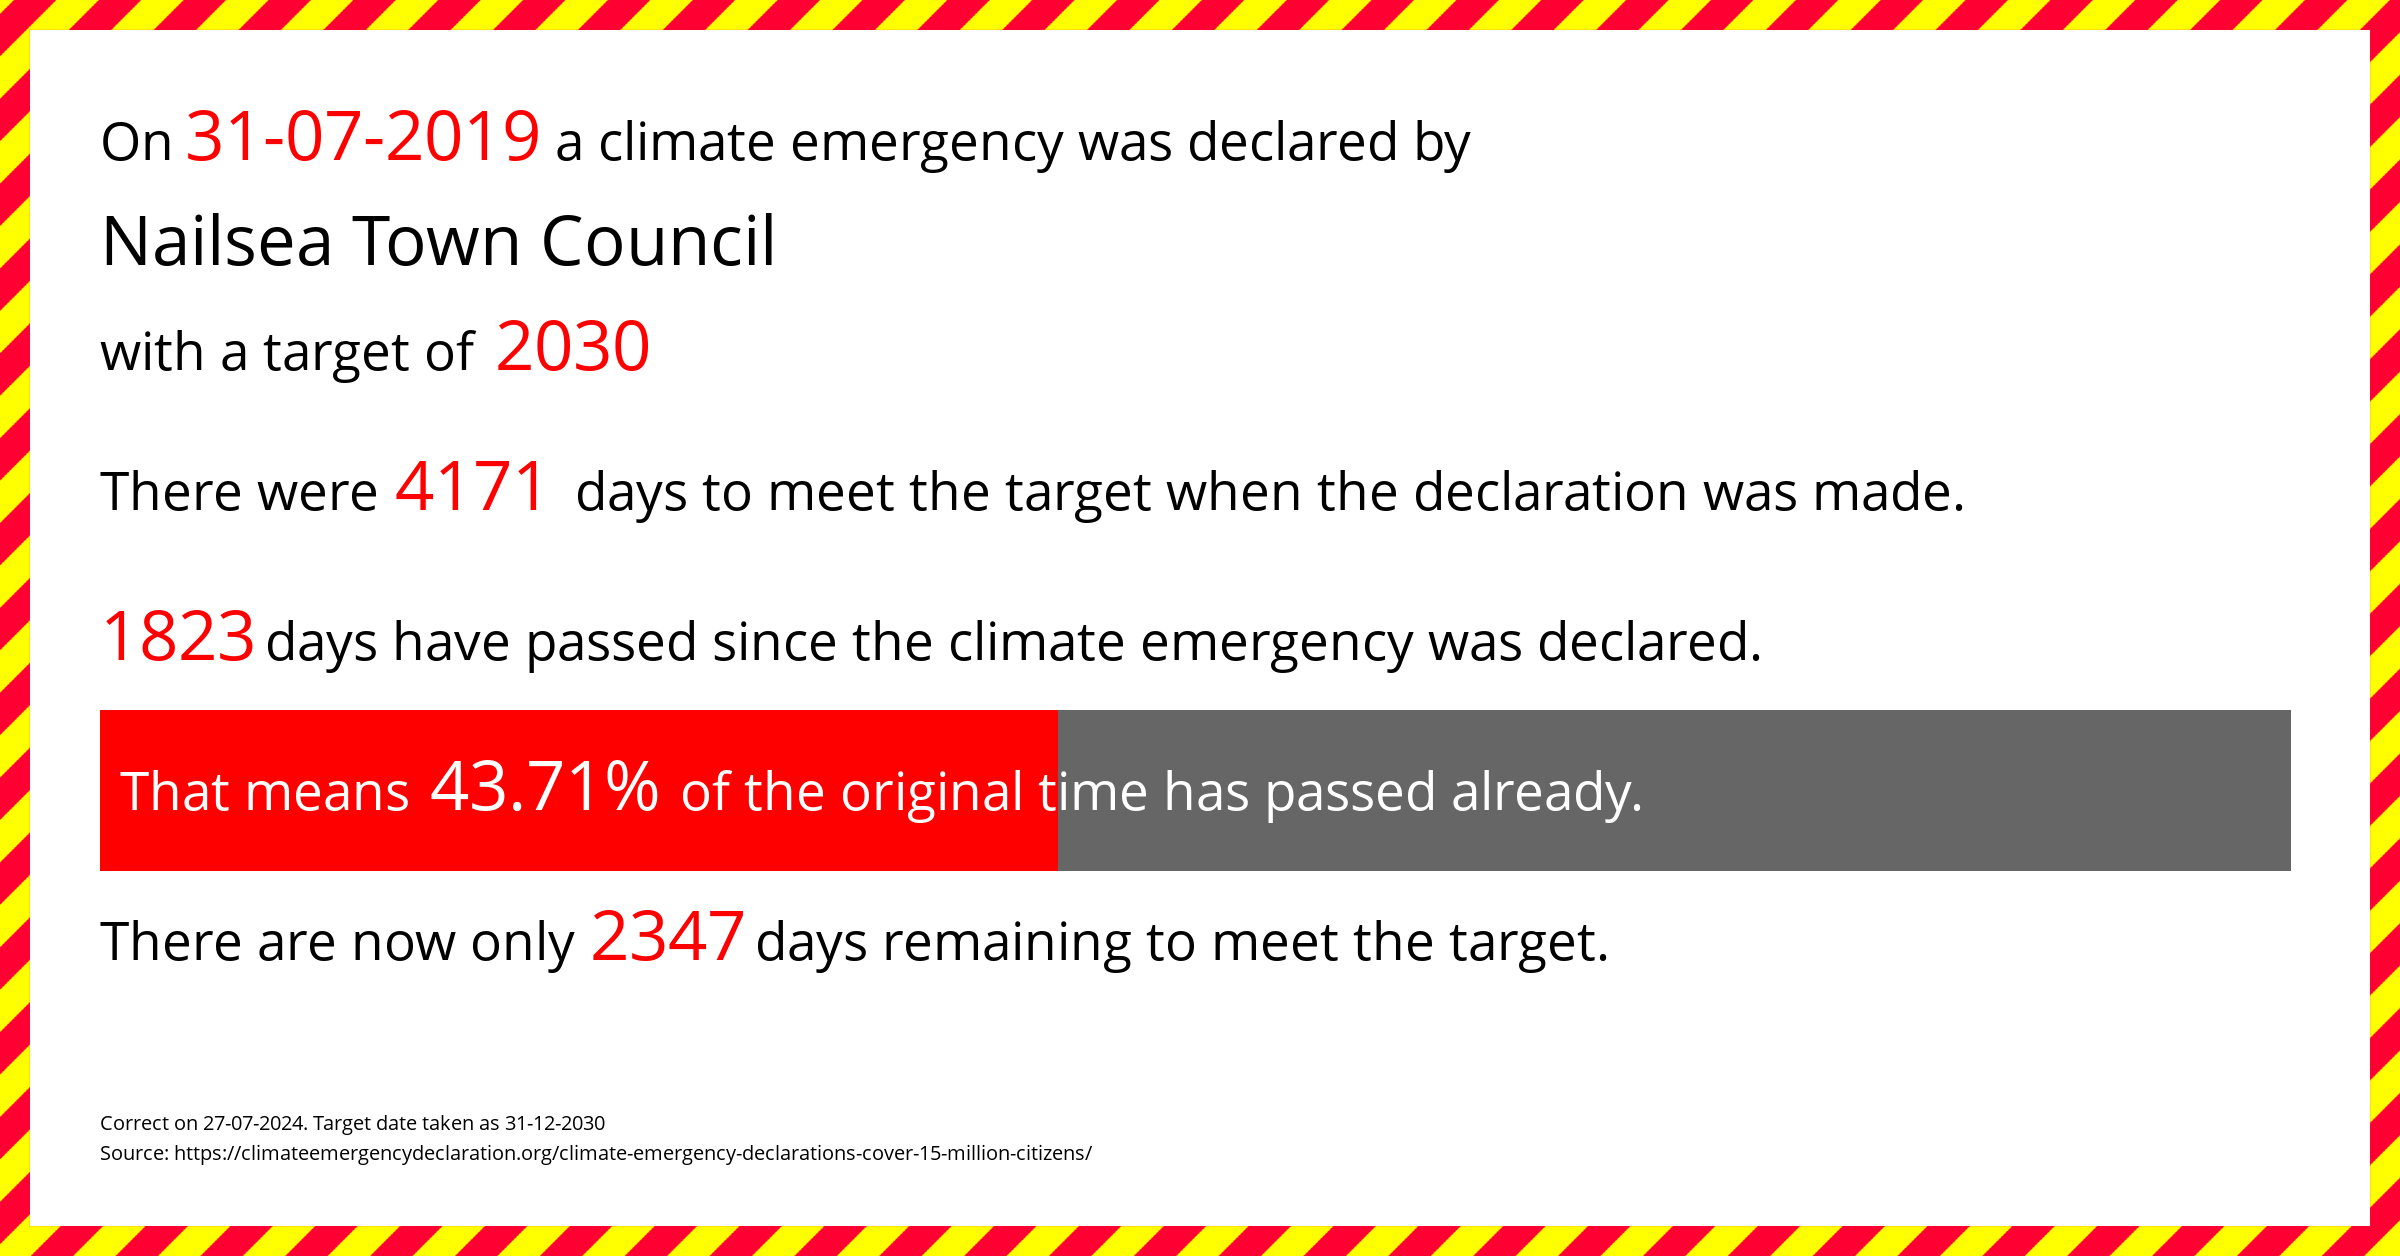 Nailsea Town Council declared a Climate emergency on Wednesday 31st July 2019, with a target of 2030.